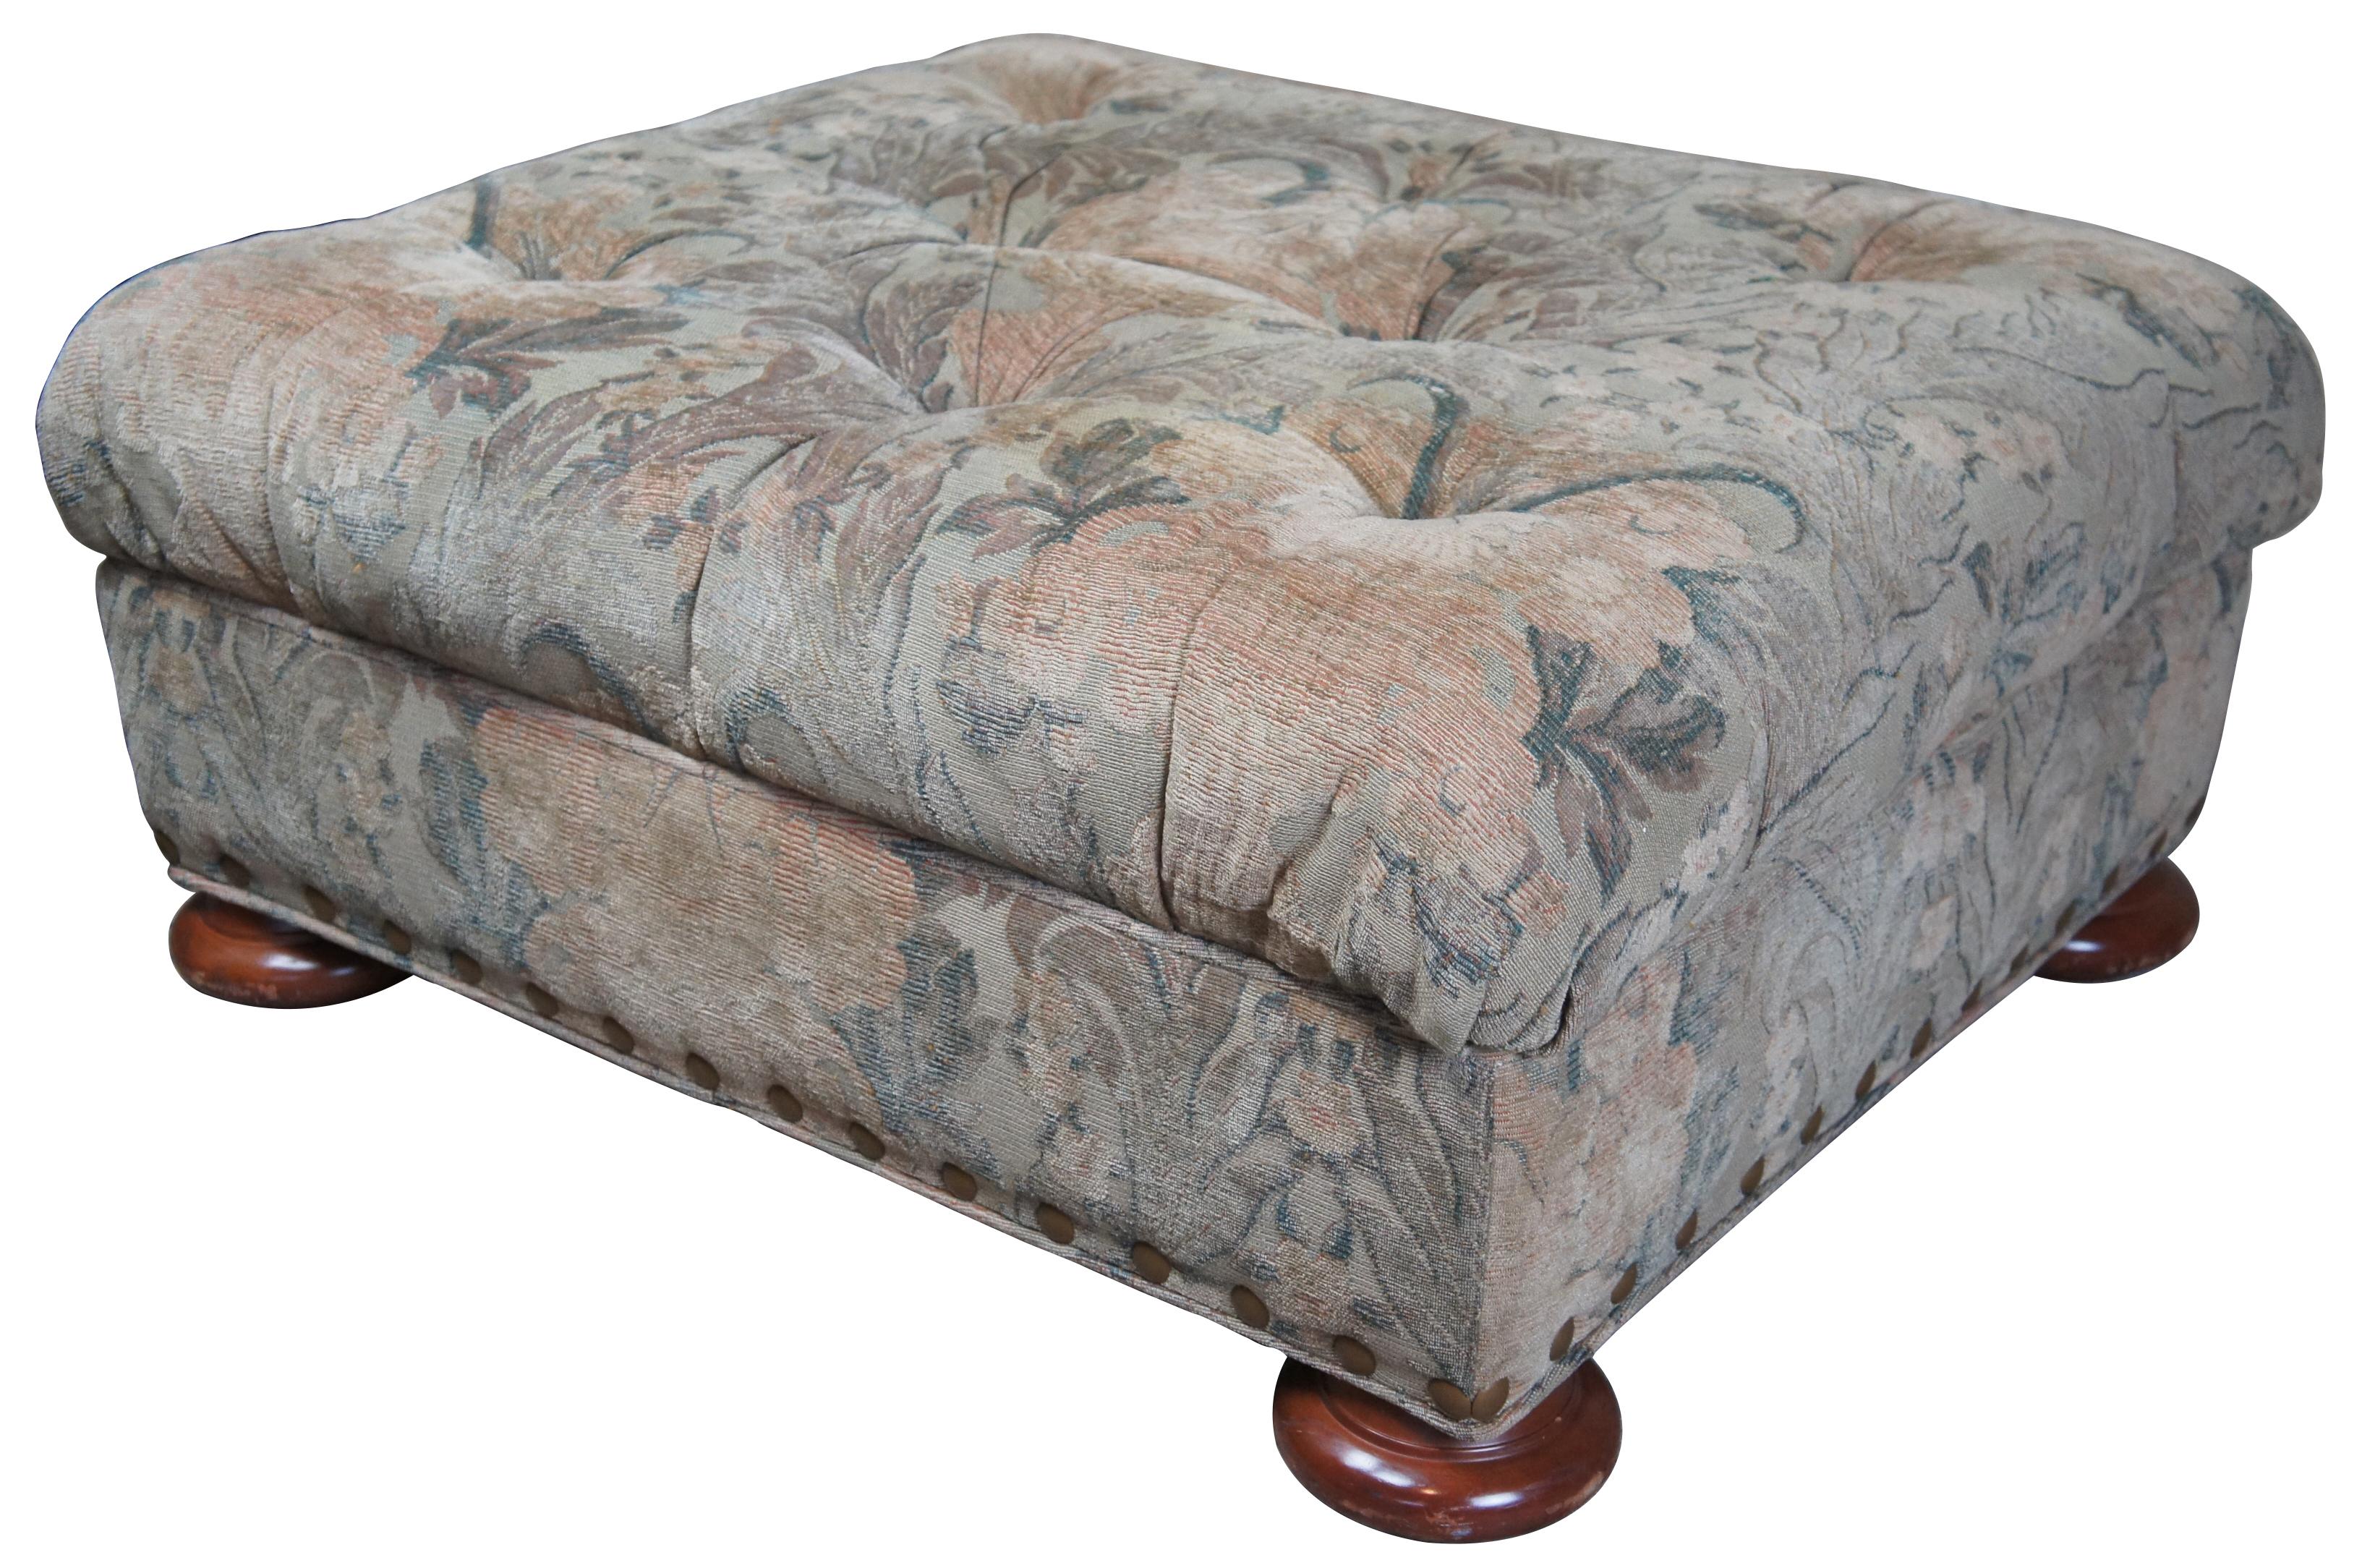 Vintage Baker Furniture ottoman. Features a floral upholstery with tufted top, large nailhead trim and bun feet. Original Baker Furniture crown and rose label on underside. Measure: 34